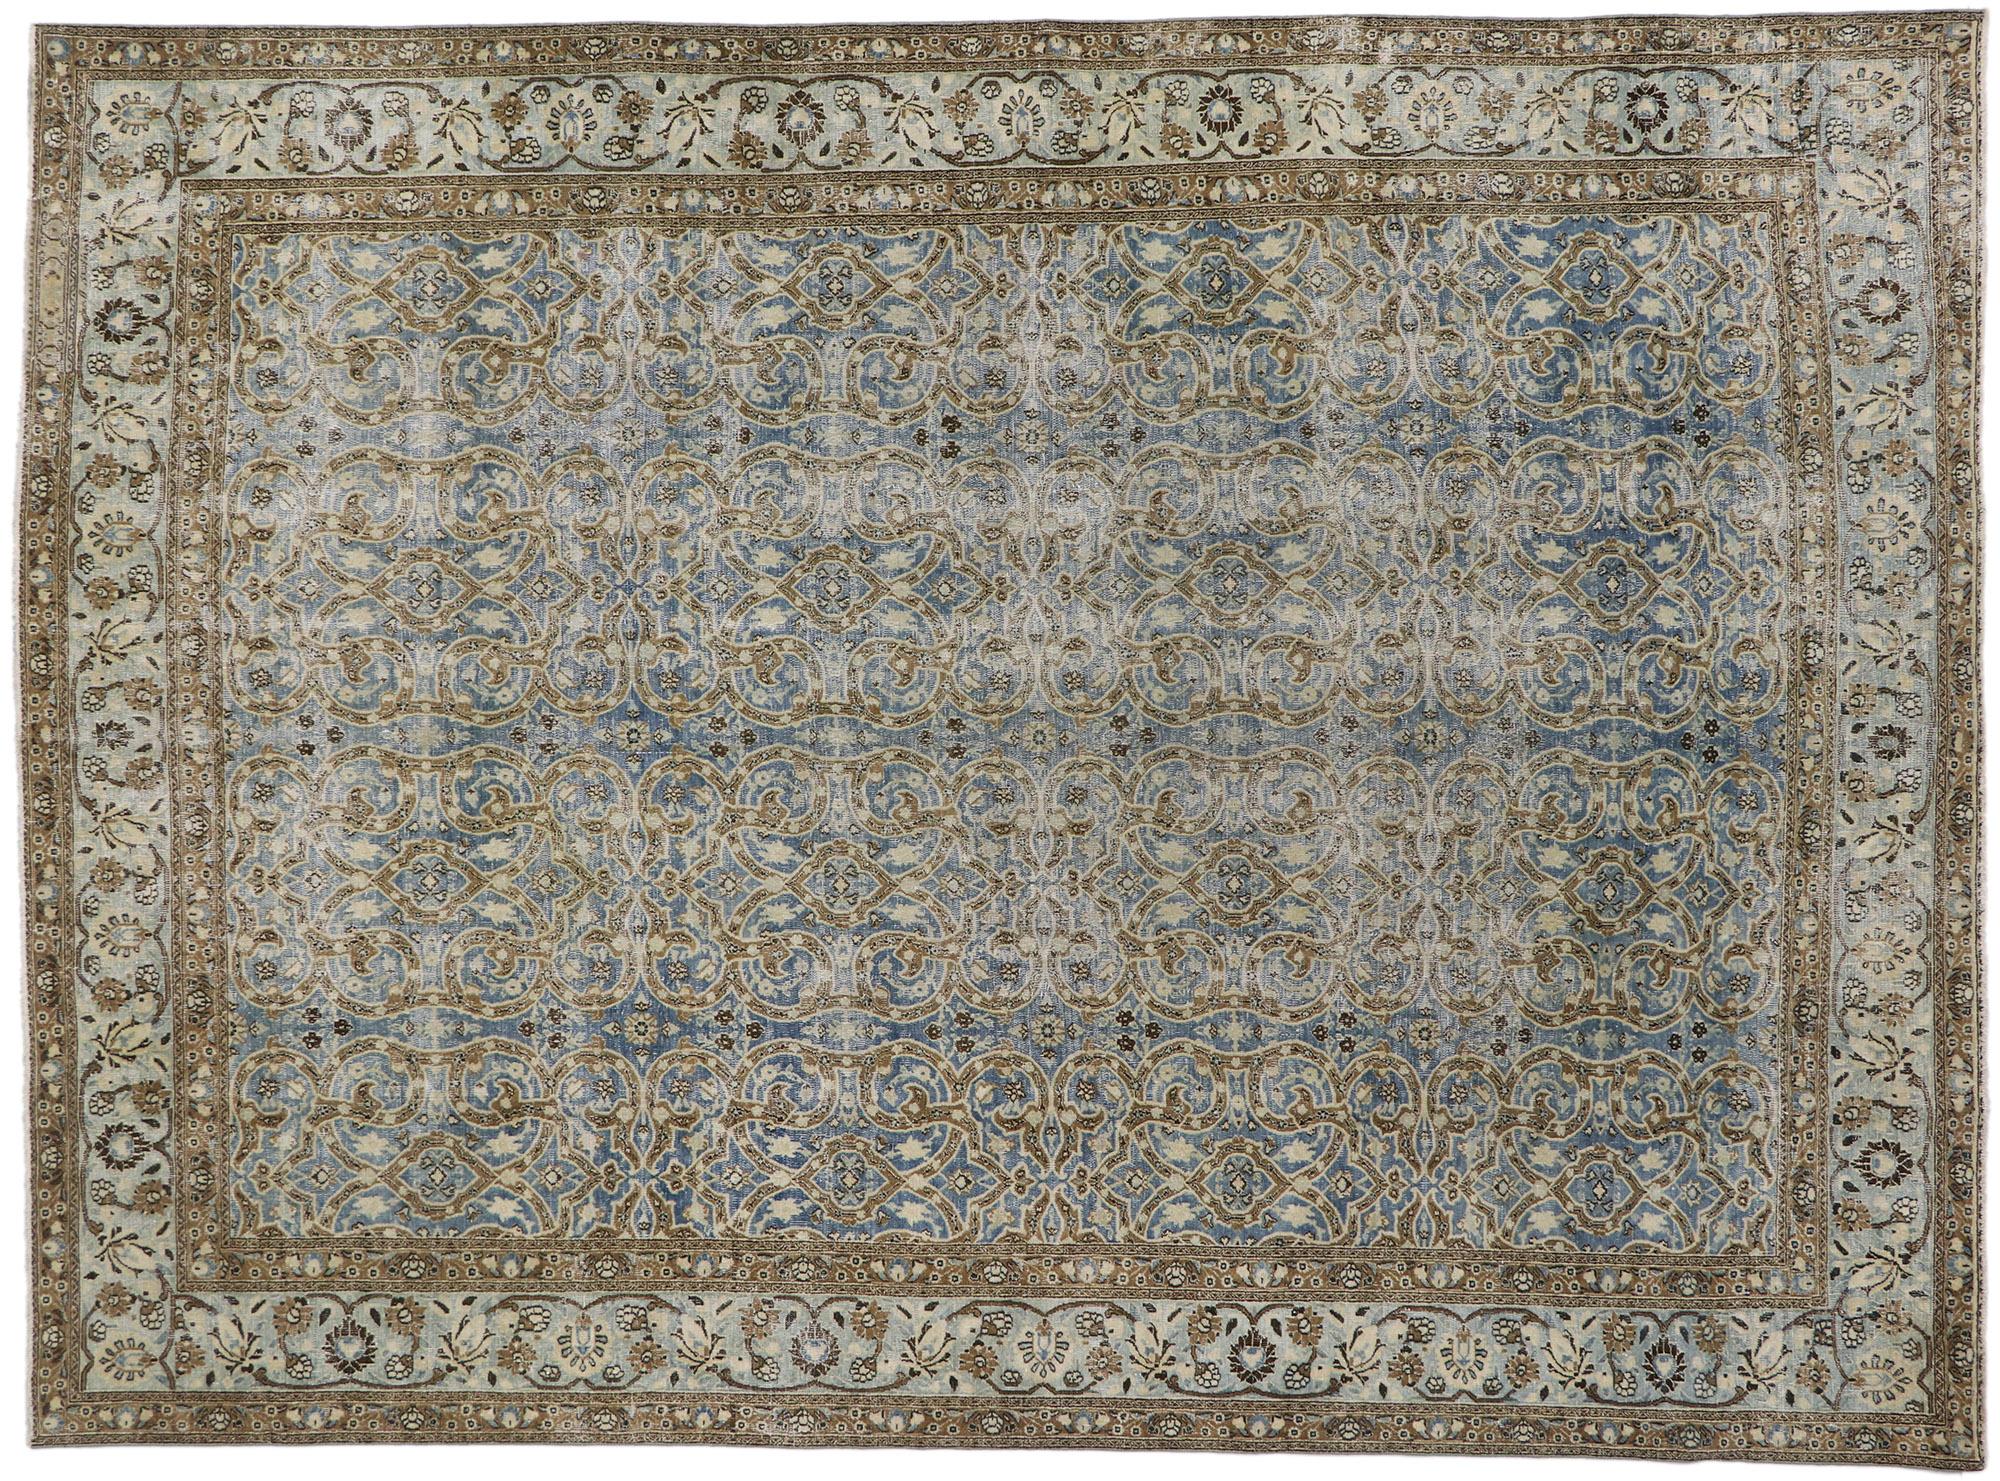 60940 Distressed Antique Persian Mashhad rug 08'09 x 12'00. Effortlessly chic and emanating coastal vibes with rustic sensibility, this hand knotted wool distressed antique Persian Mashhad rug beautifully is a captivating vision of woven beauty. The